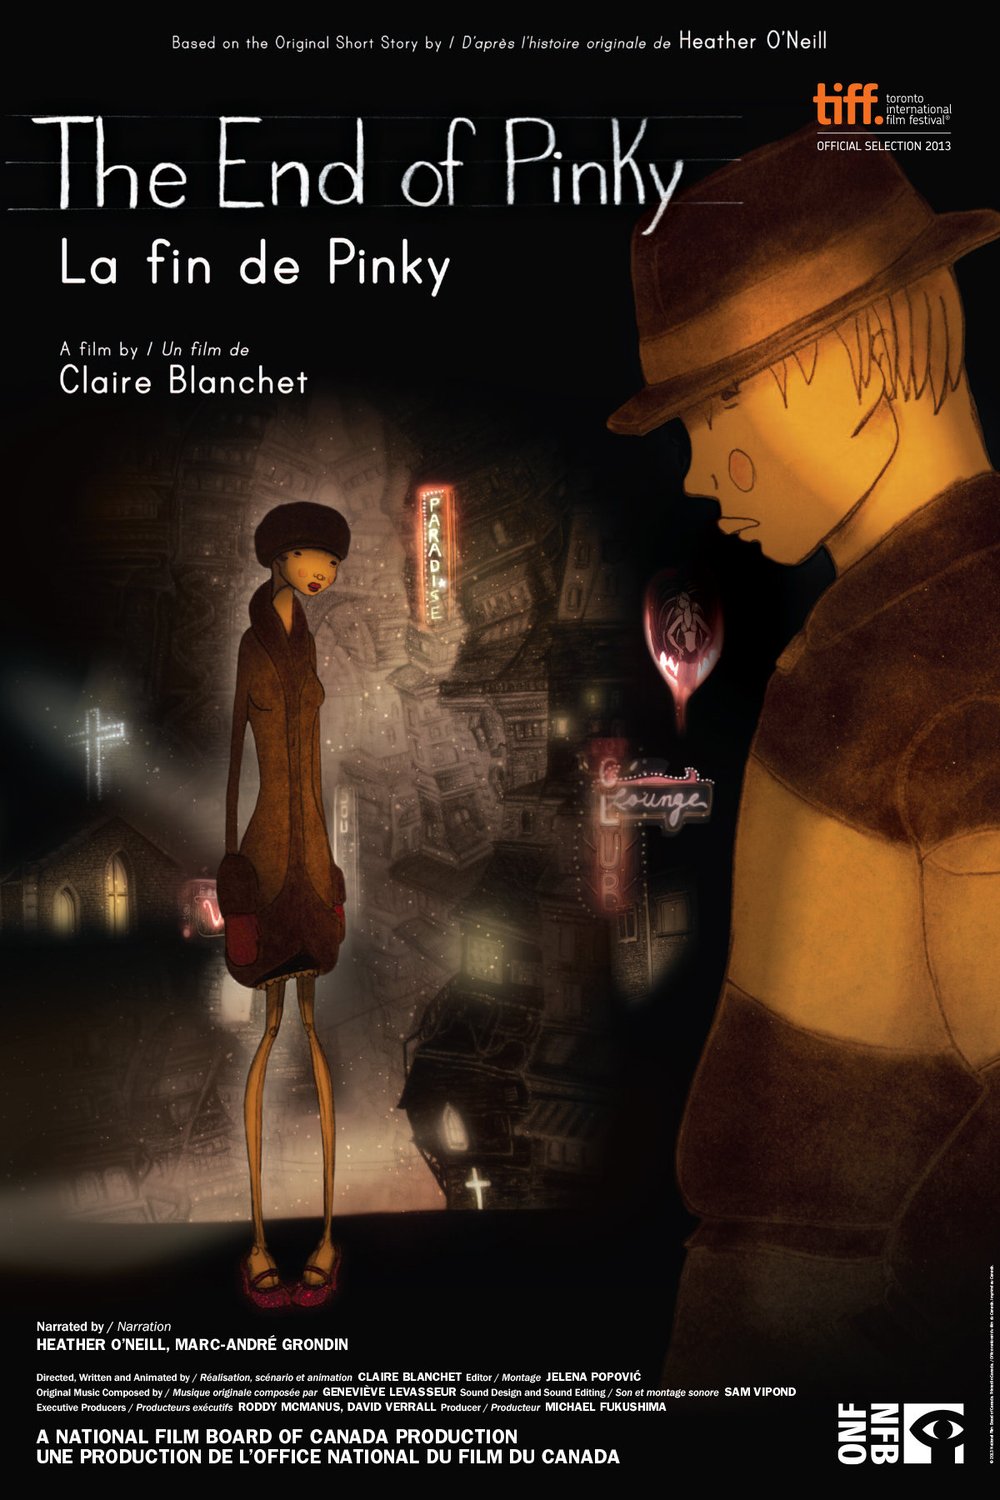 L'affiche du film The End of Pinky